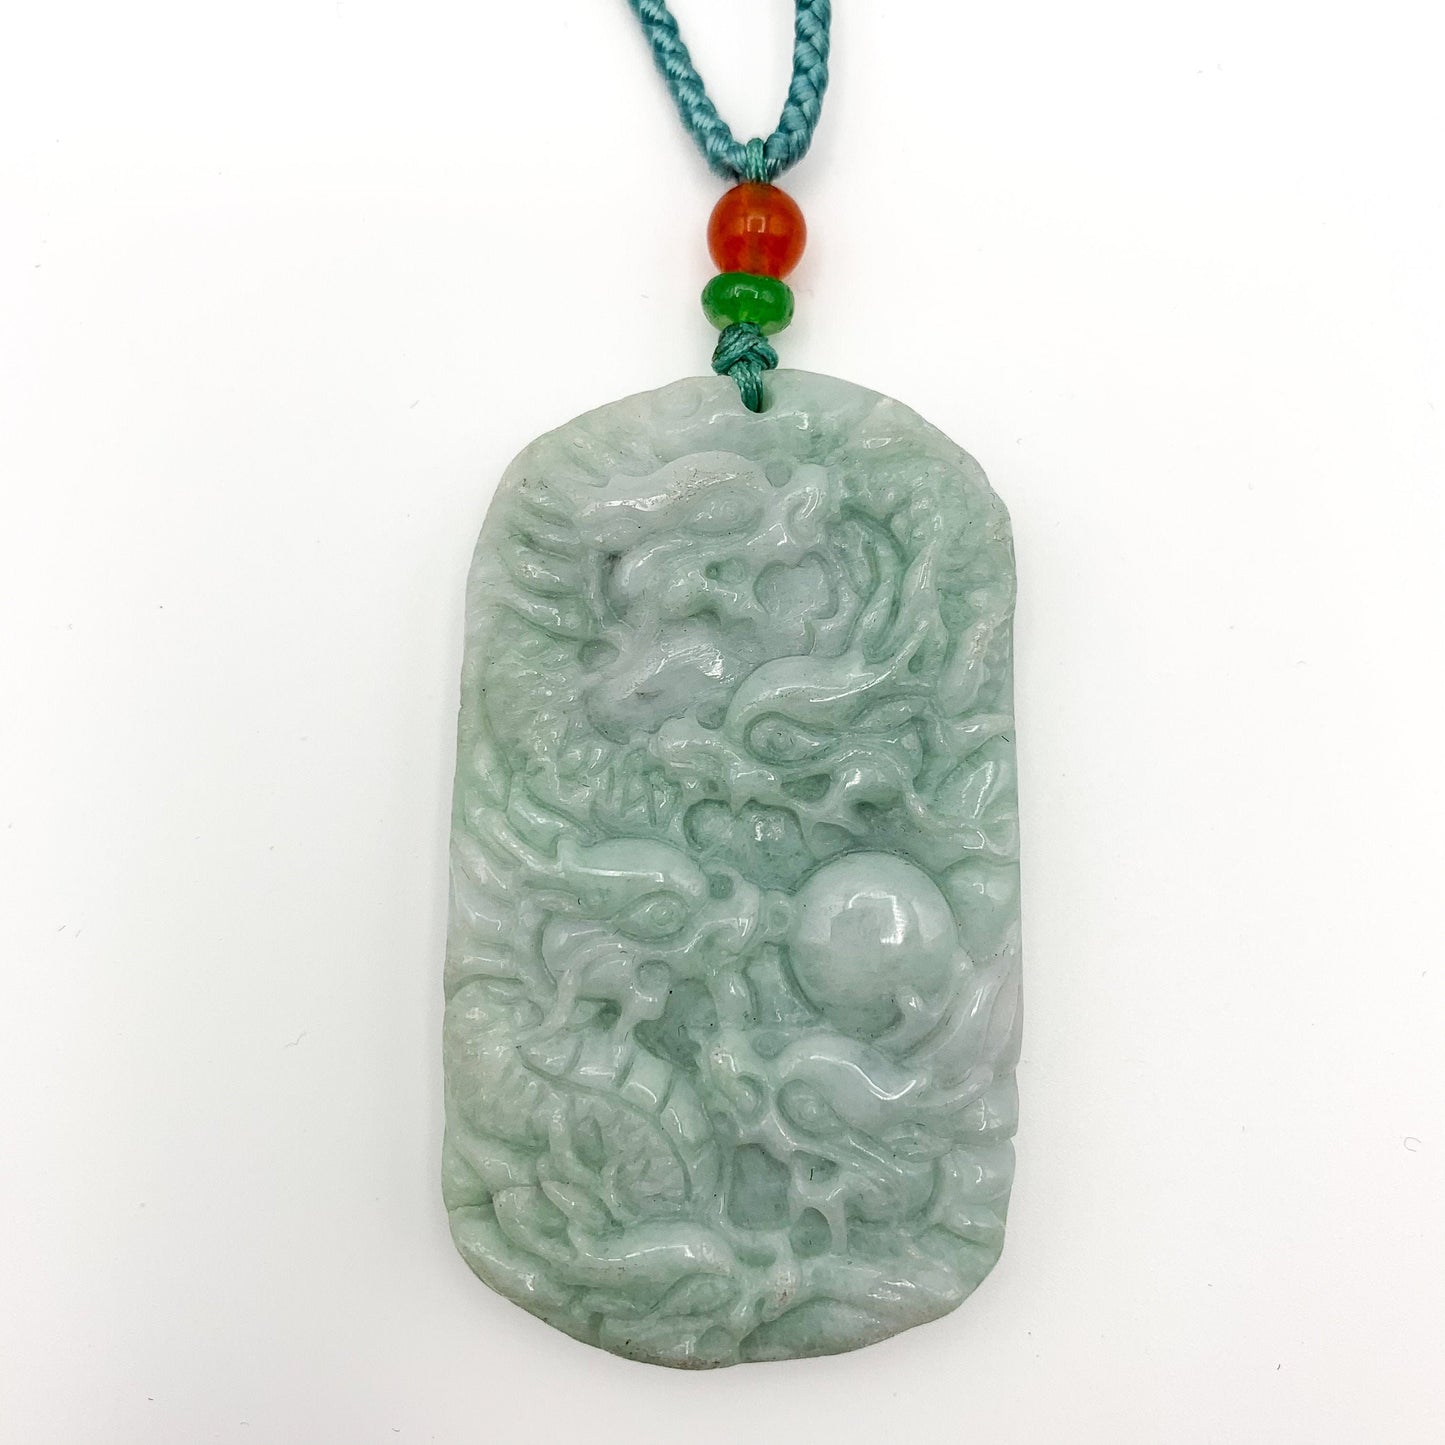 9 Dragon Jadeite Jade Chinese Zodiac Hand Carved Pendant Necklace, YJ-0321-0447197 - AriaDesignCollection